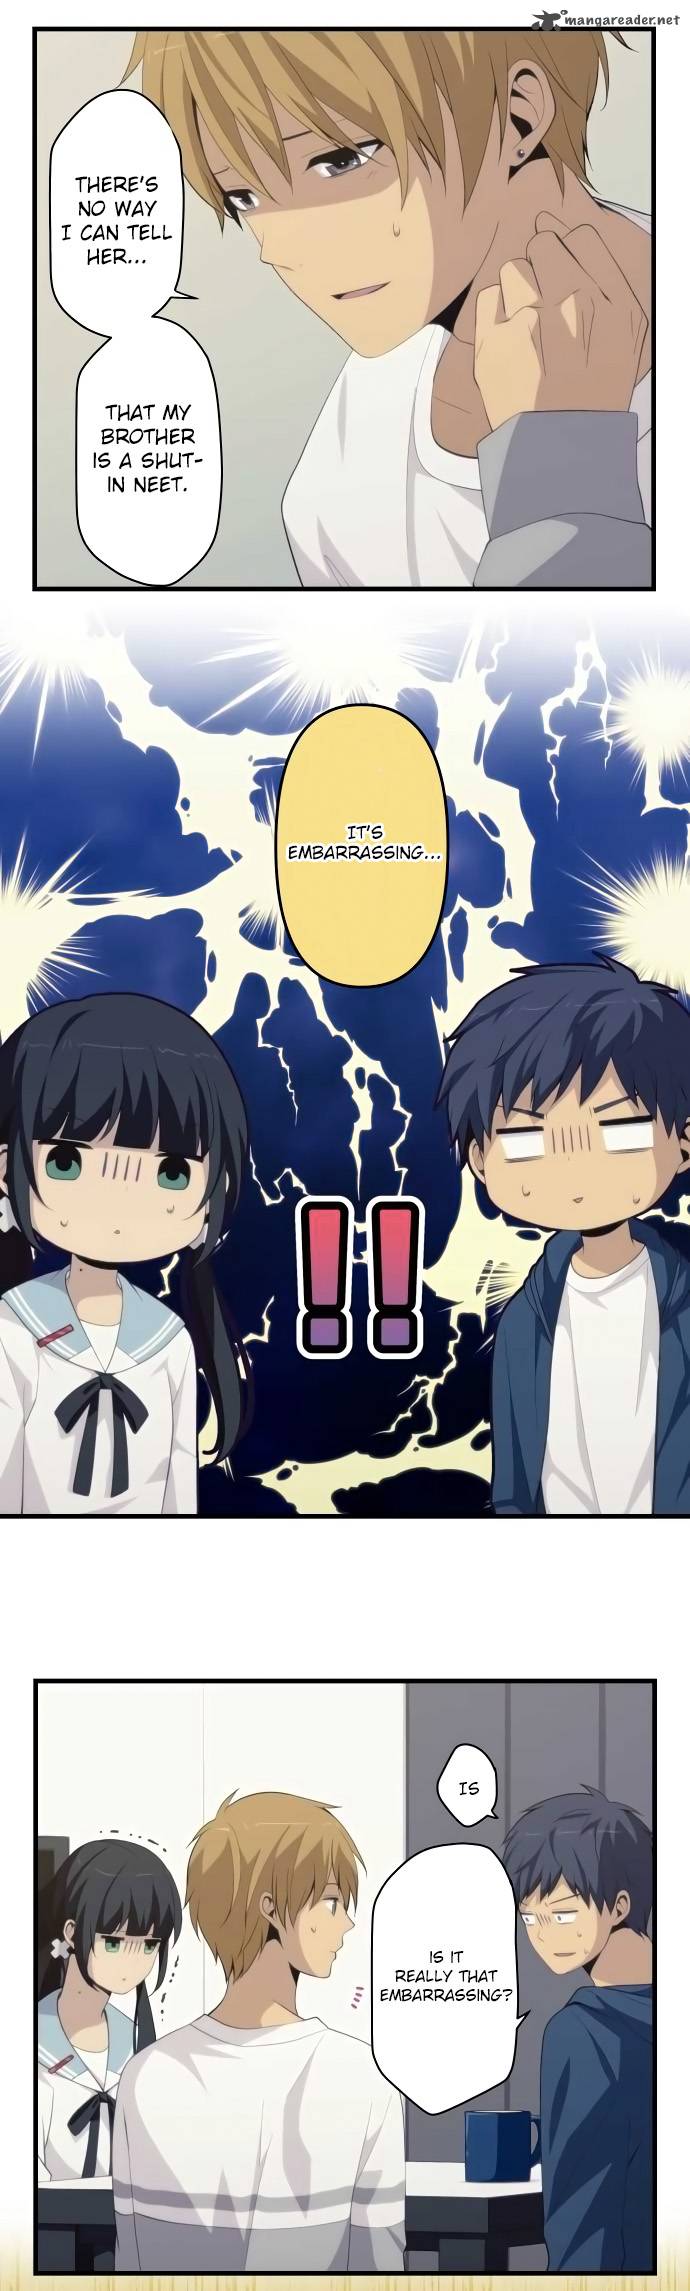 Relife 168 6